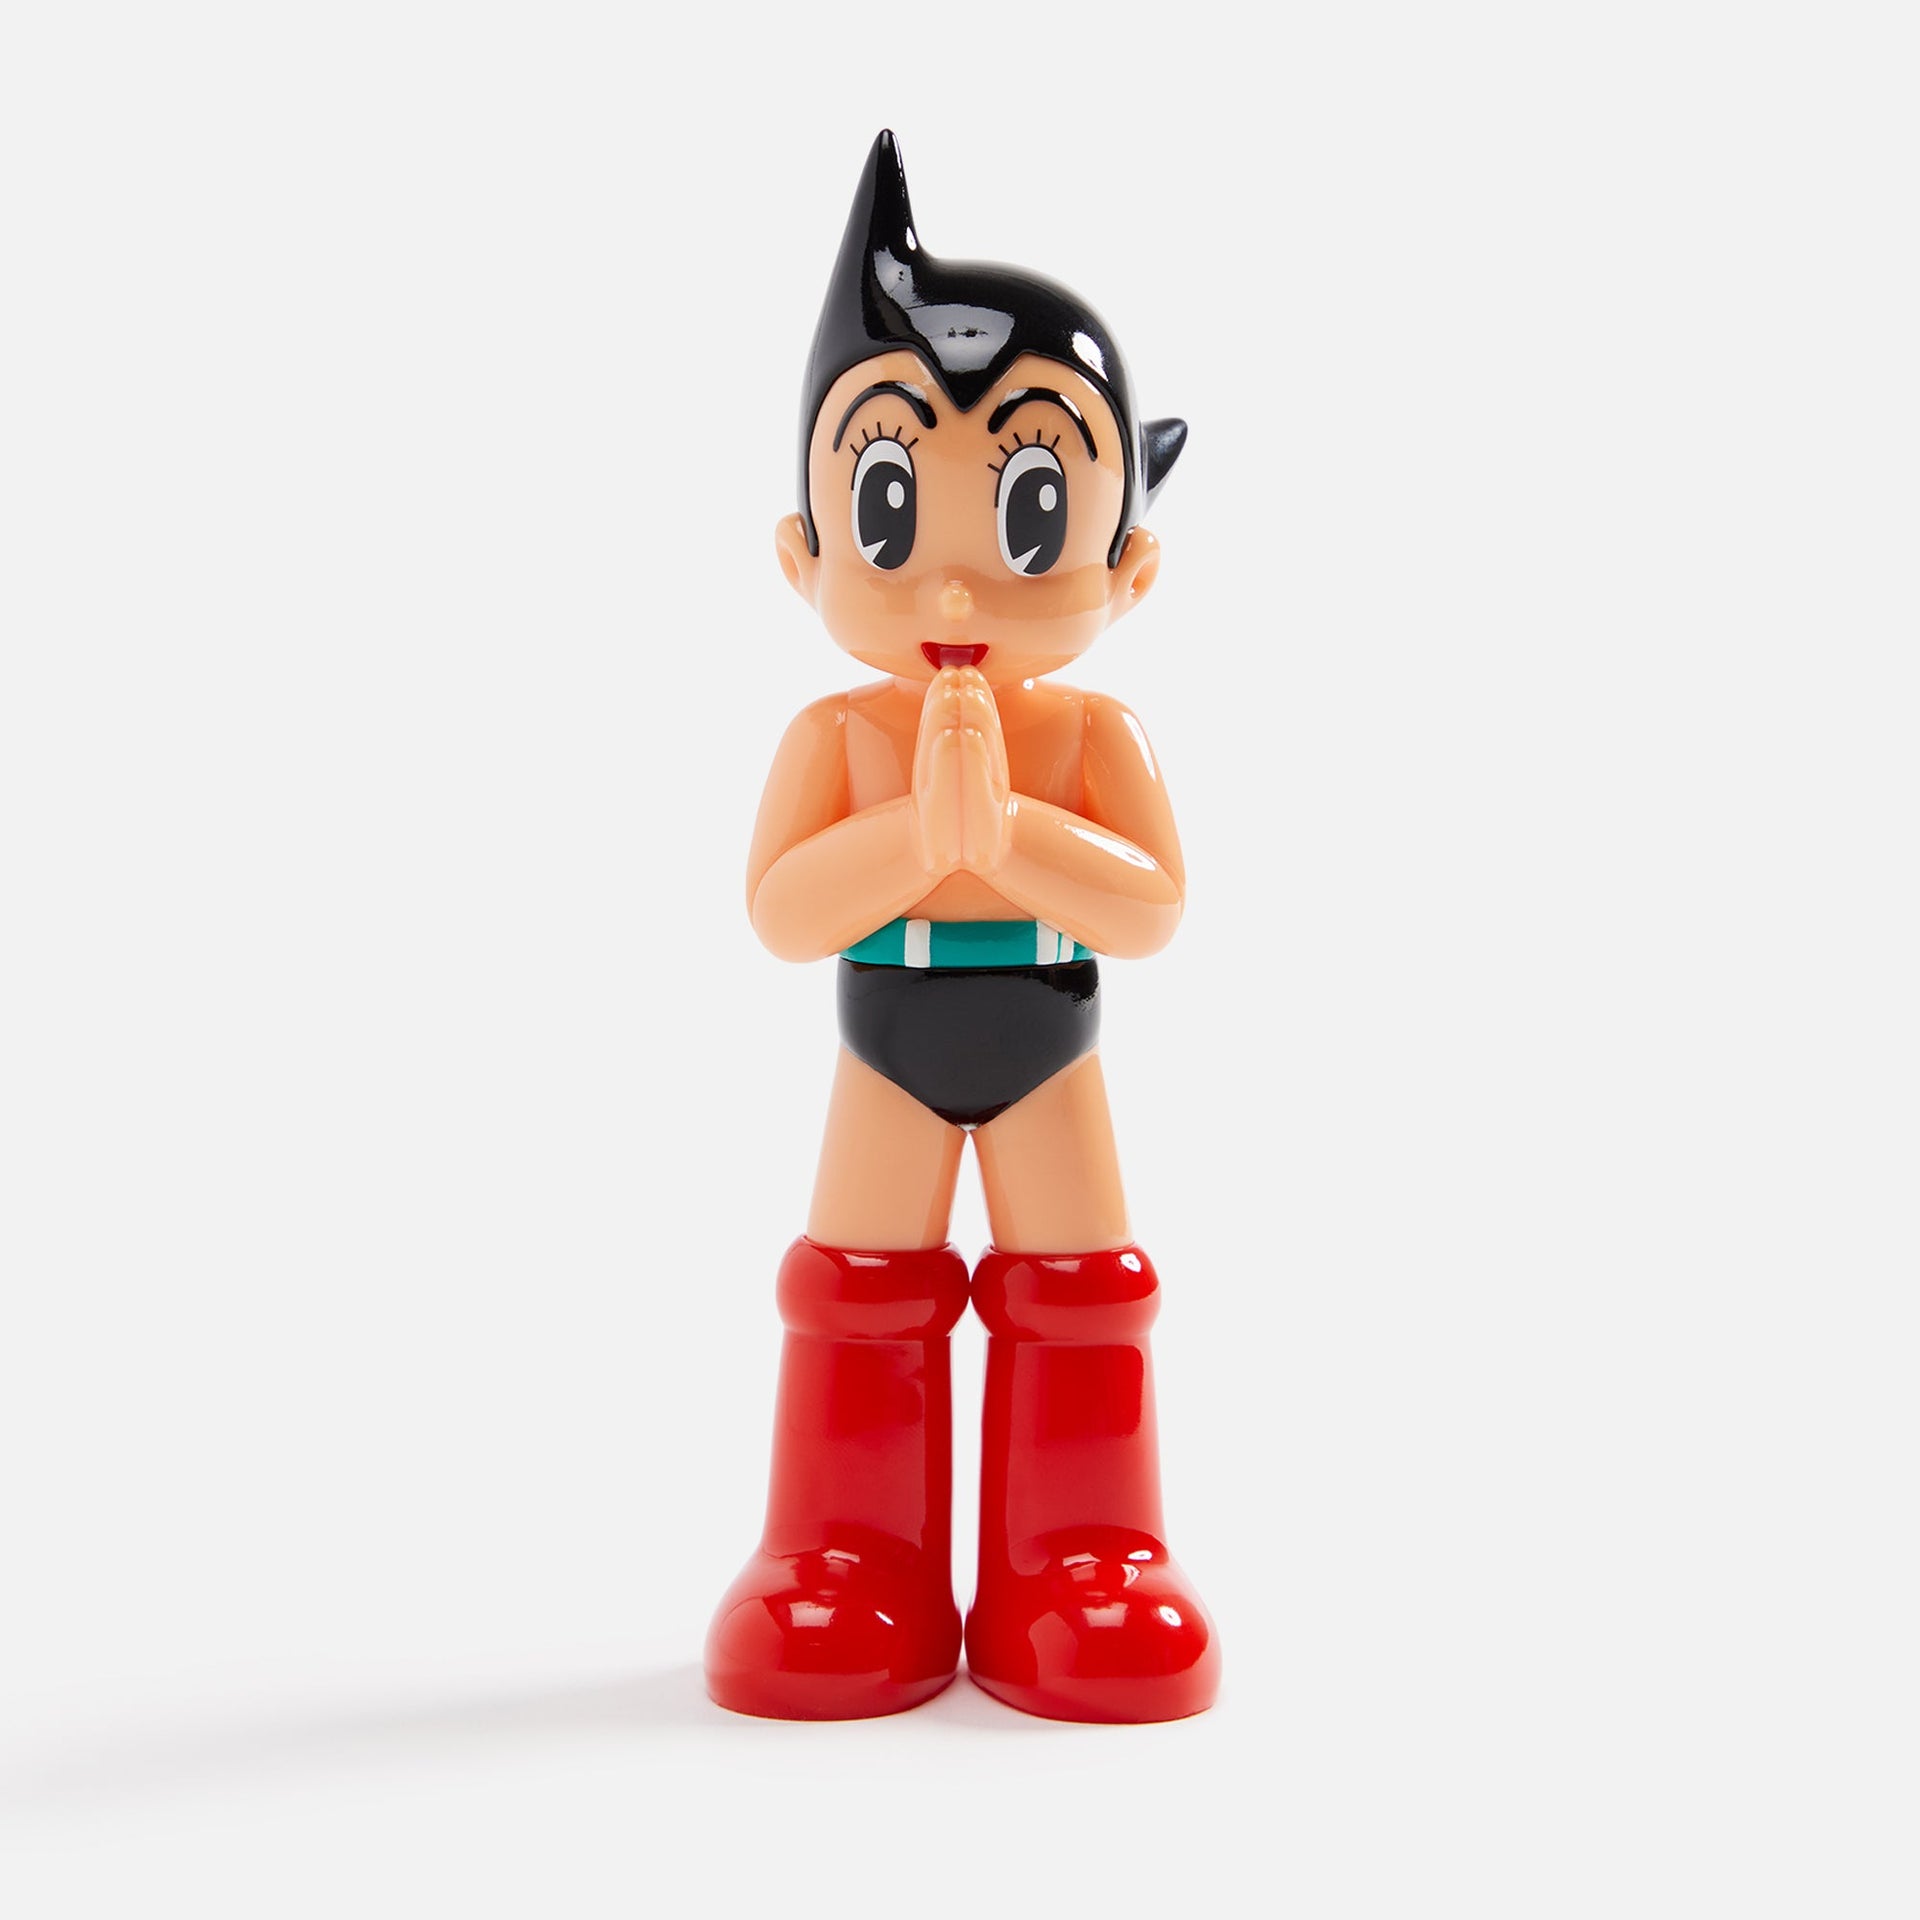 Toyqube 6" Astro Boy Greeting OG Colorway - Classic Red / Black / Green